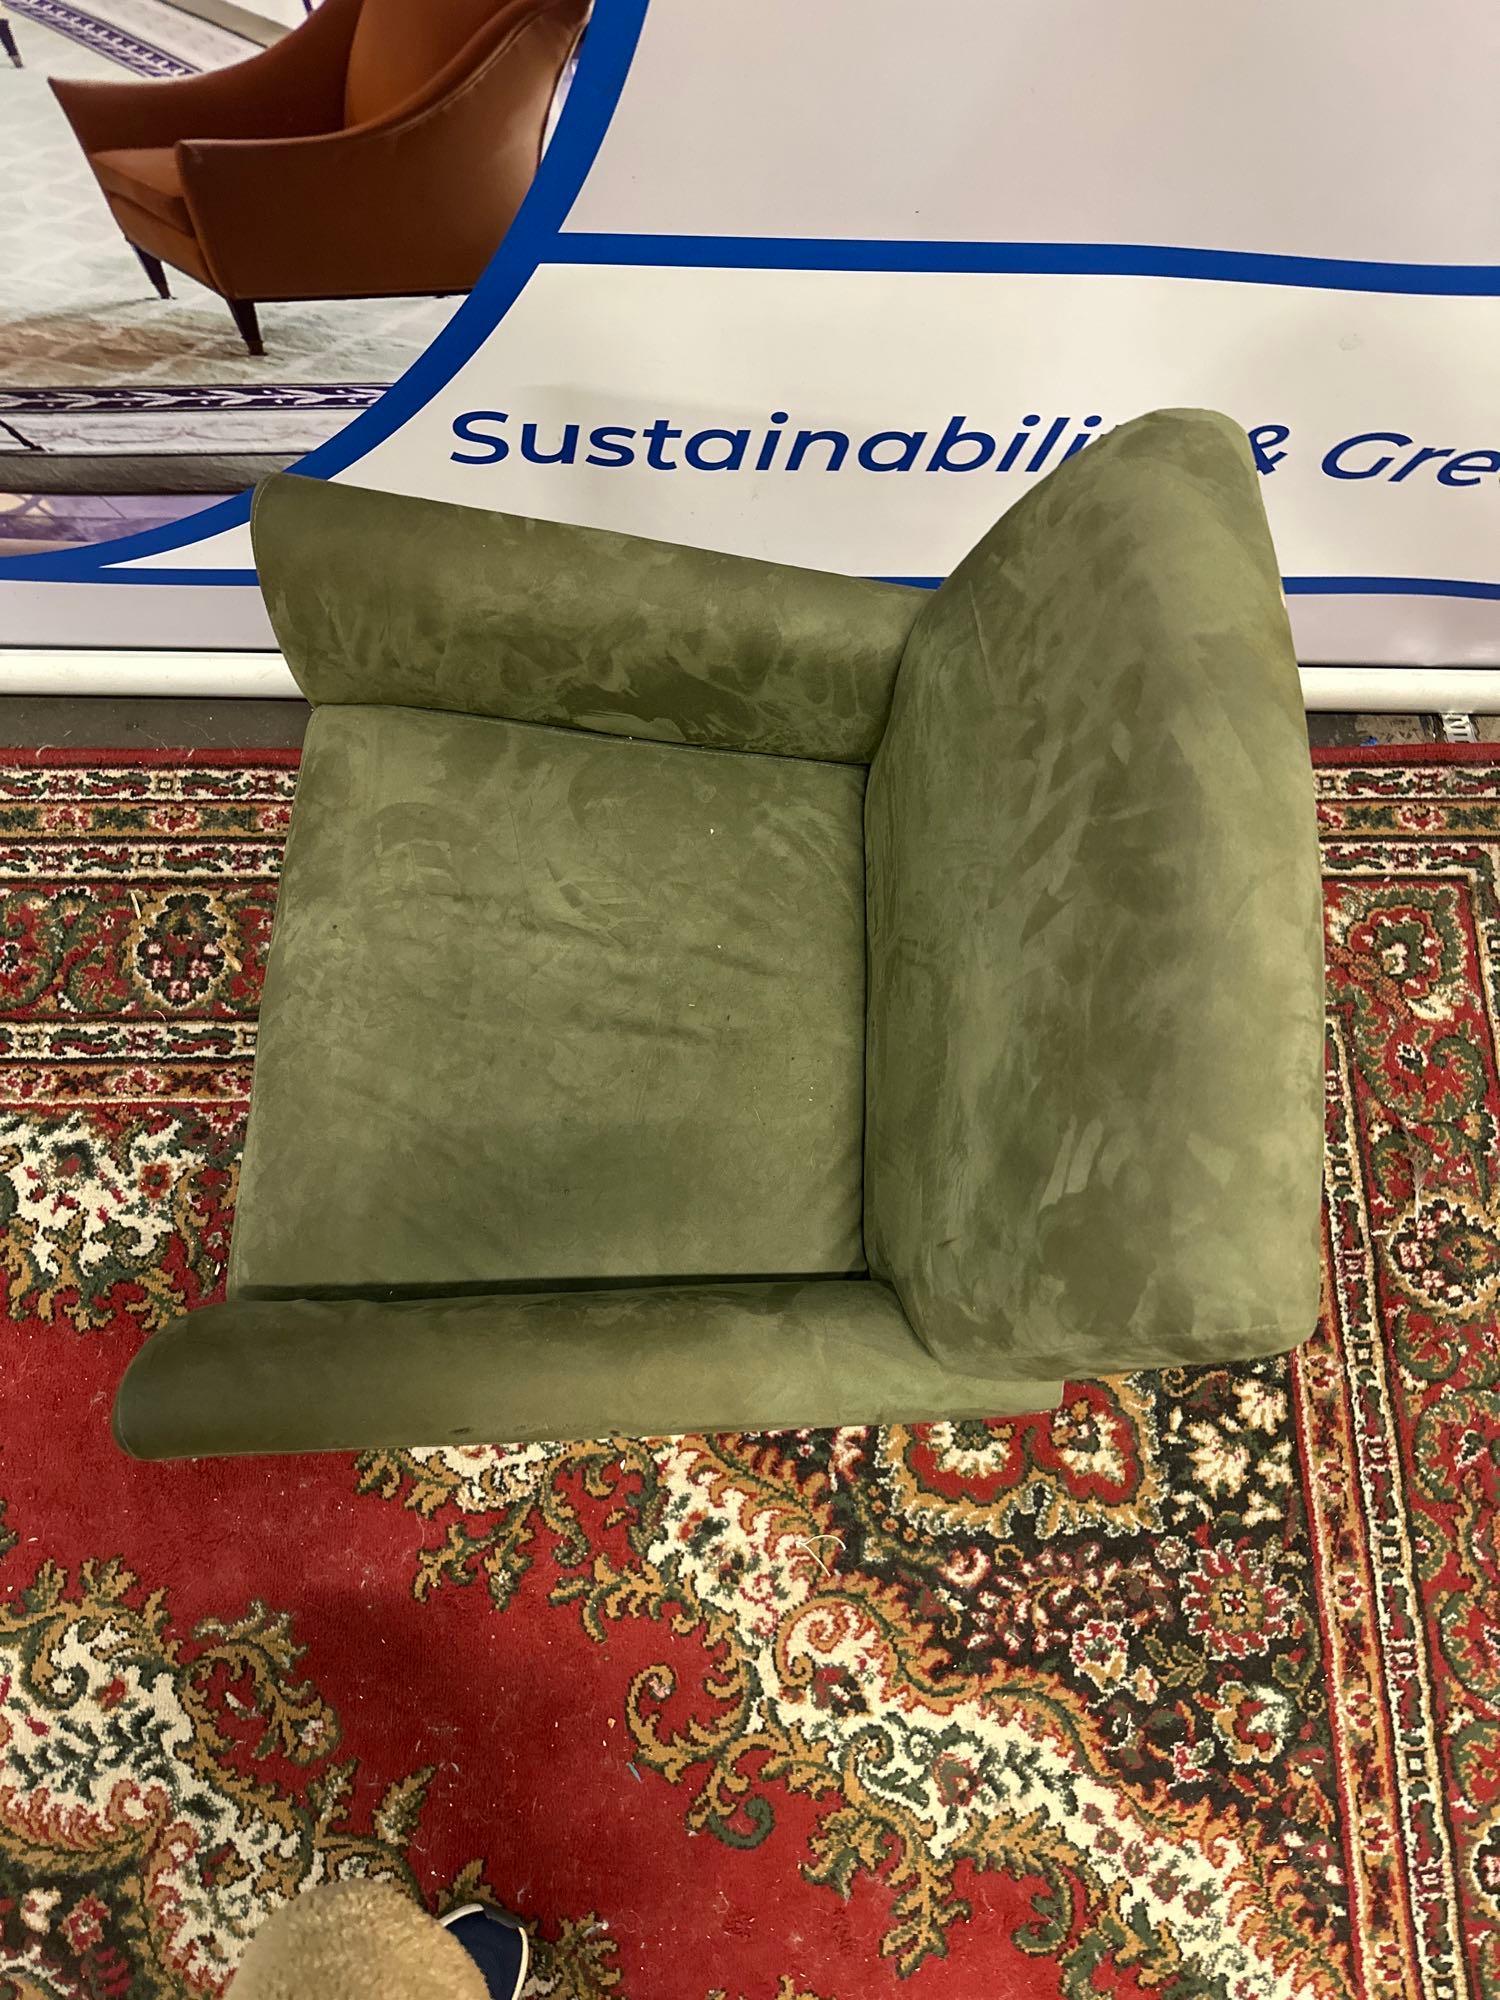 Accent Chair Upholstered In A Green Suede Fabric On Dark Wooden Frame 64 x 55 x 87cm - Image 5 of 5